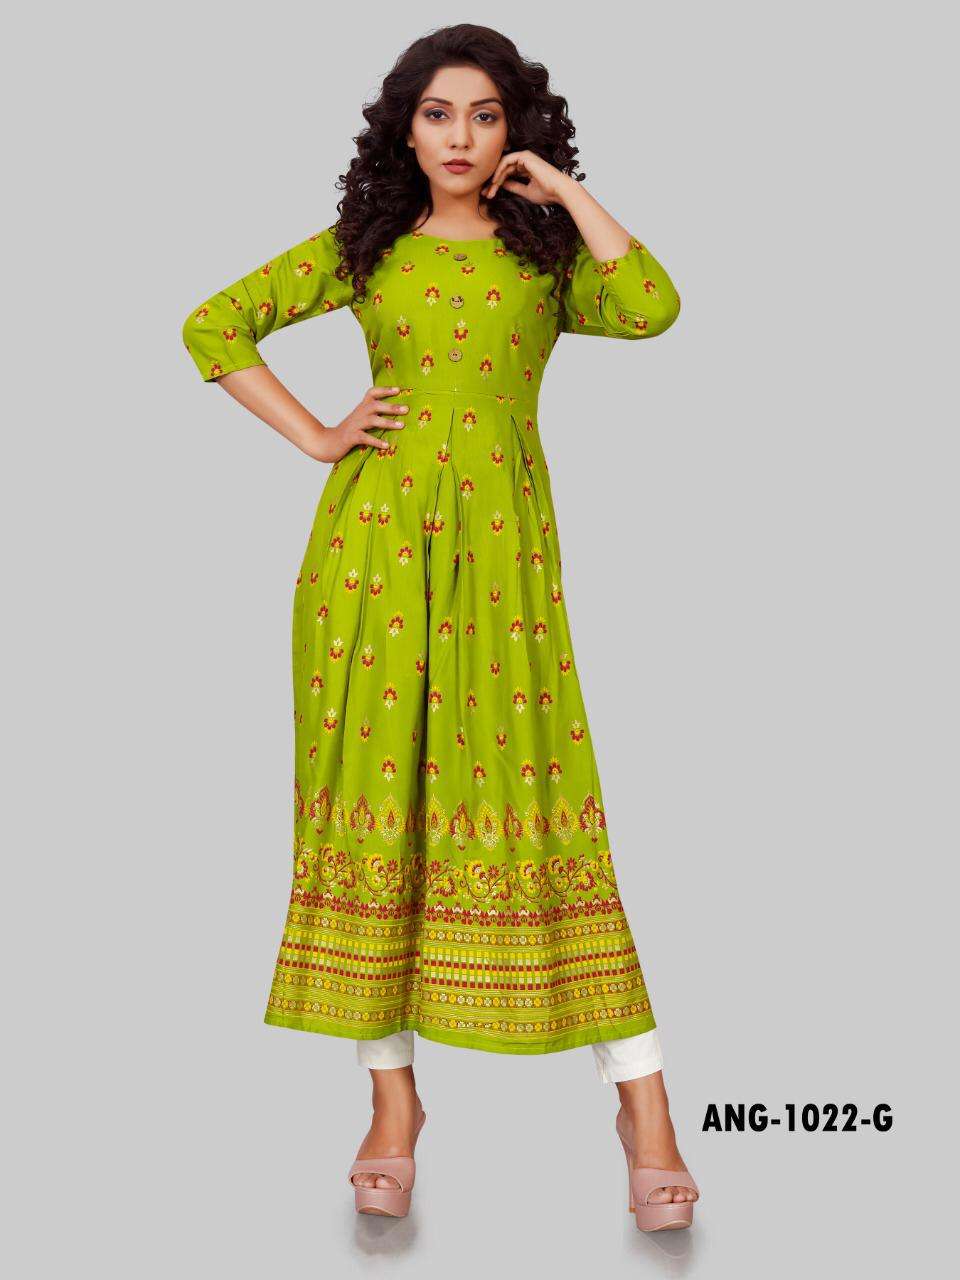 ANG-1022 BY 12 ANGEL 1022-A TO 1022-H SERIES DESIGNER STYLISH FANCY COLORFUL BEAUTIFUL PARTY WEAR & ETHNIC WEAR COLLECTION HEAVY RAYON KURTIS AT WHOLESALE PRICE